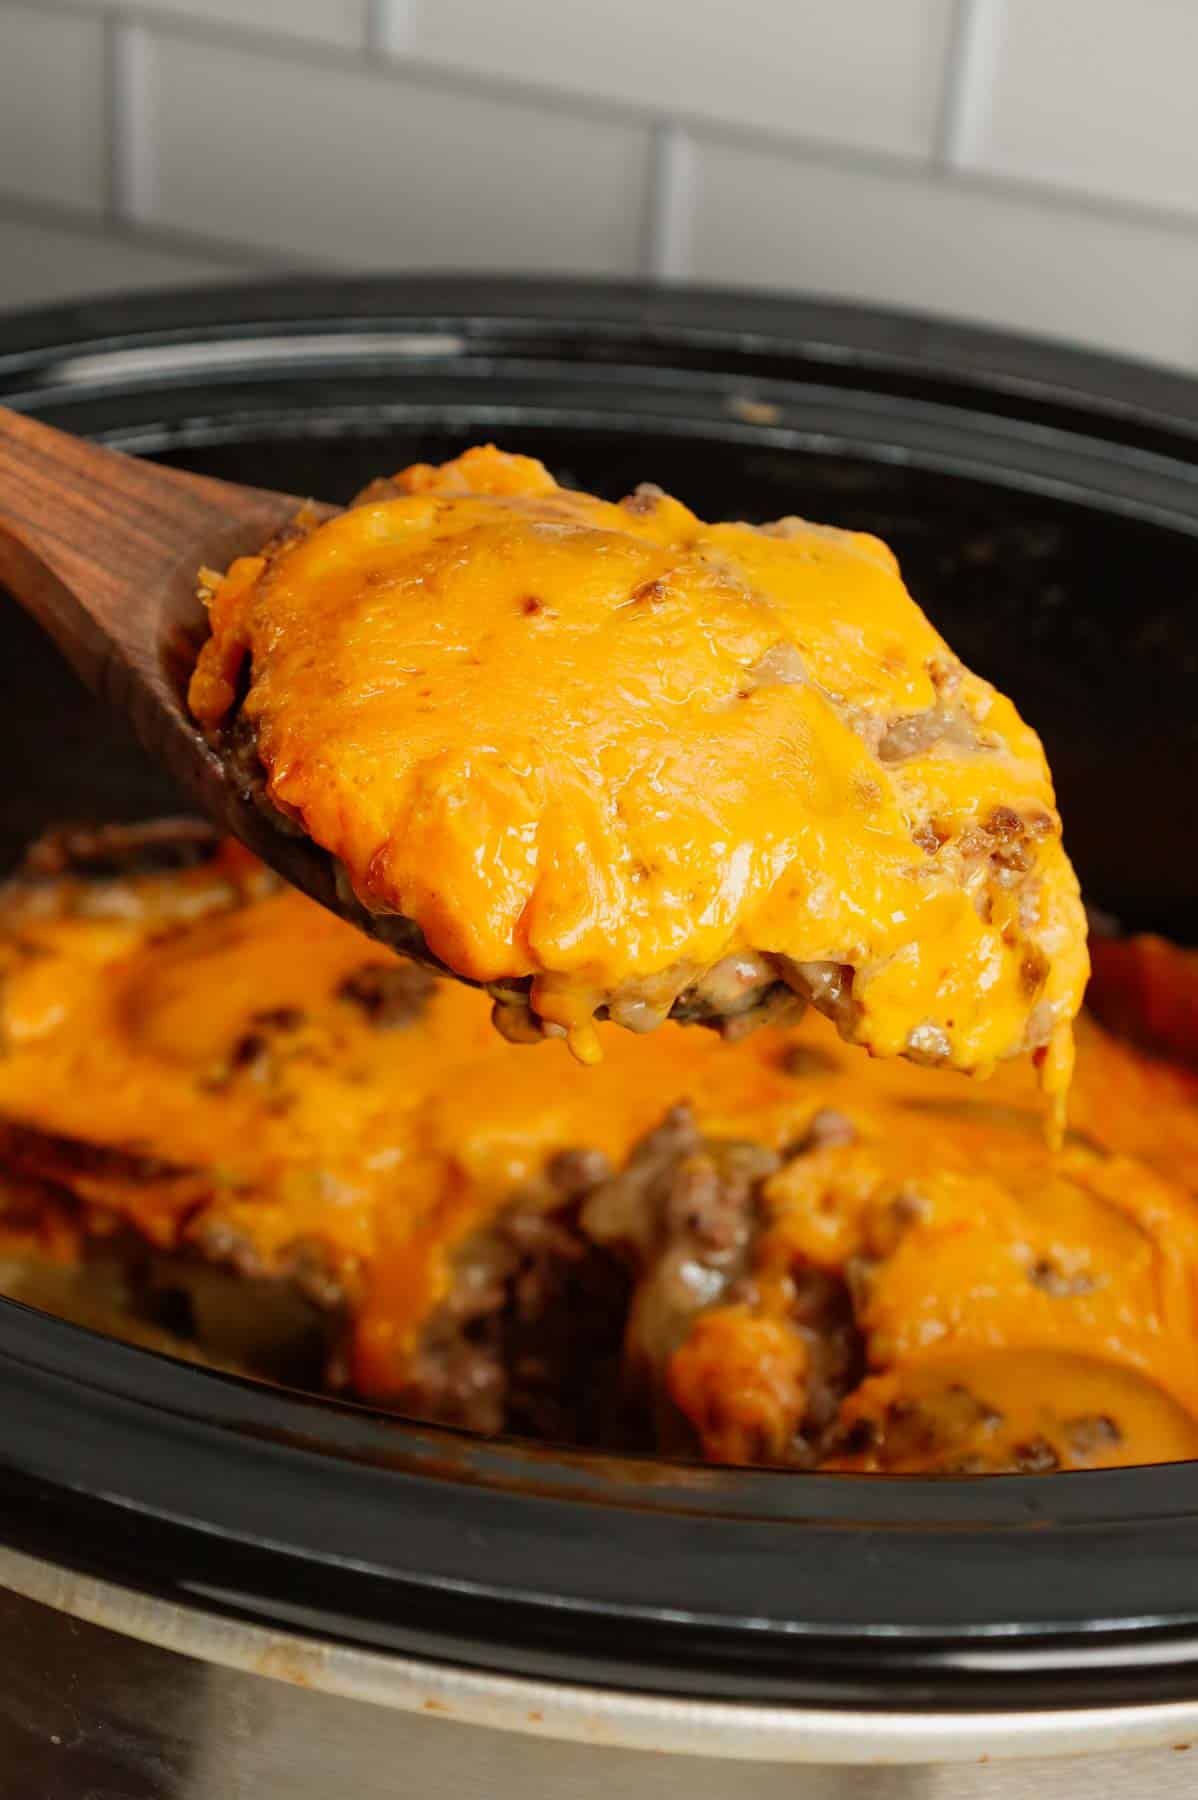 Crock Pot Hamburger Potato Casserole is a hearty slow cooker dinner loaded with ground beef, sliced potatoes, sliced onions, cheddar soup, cream of mushroom soup and shredded cheddar cheese.